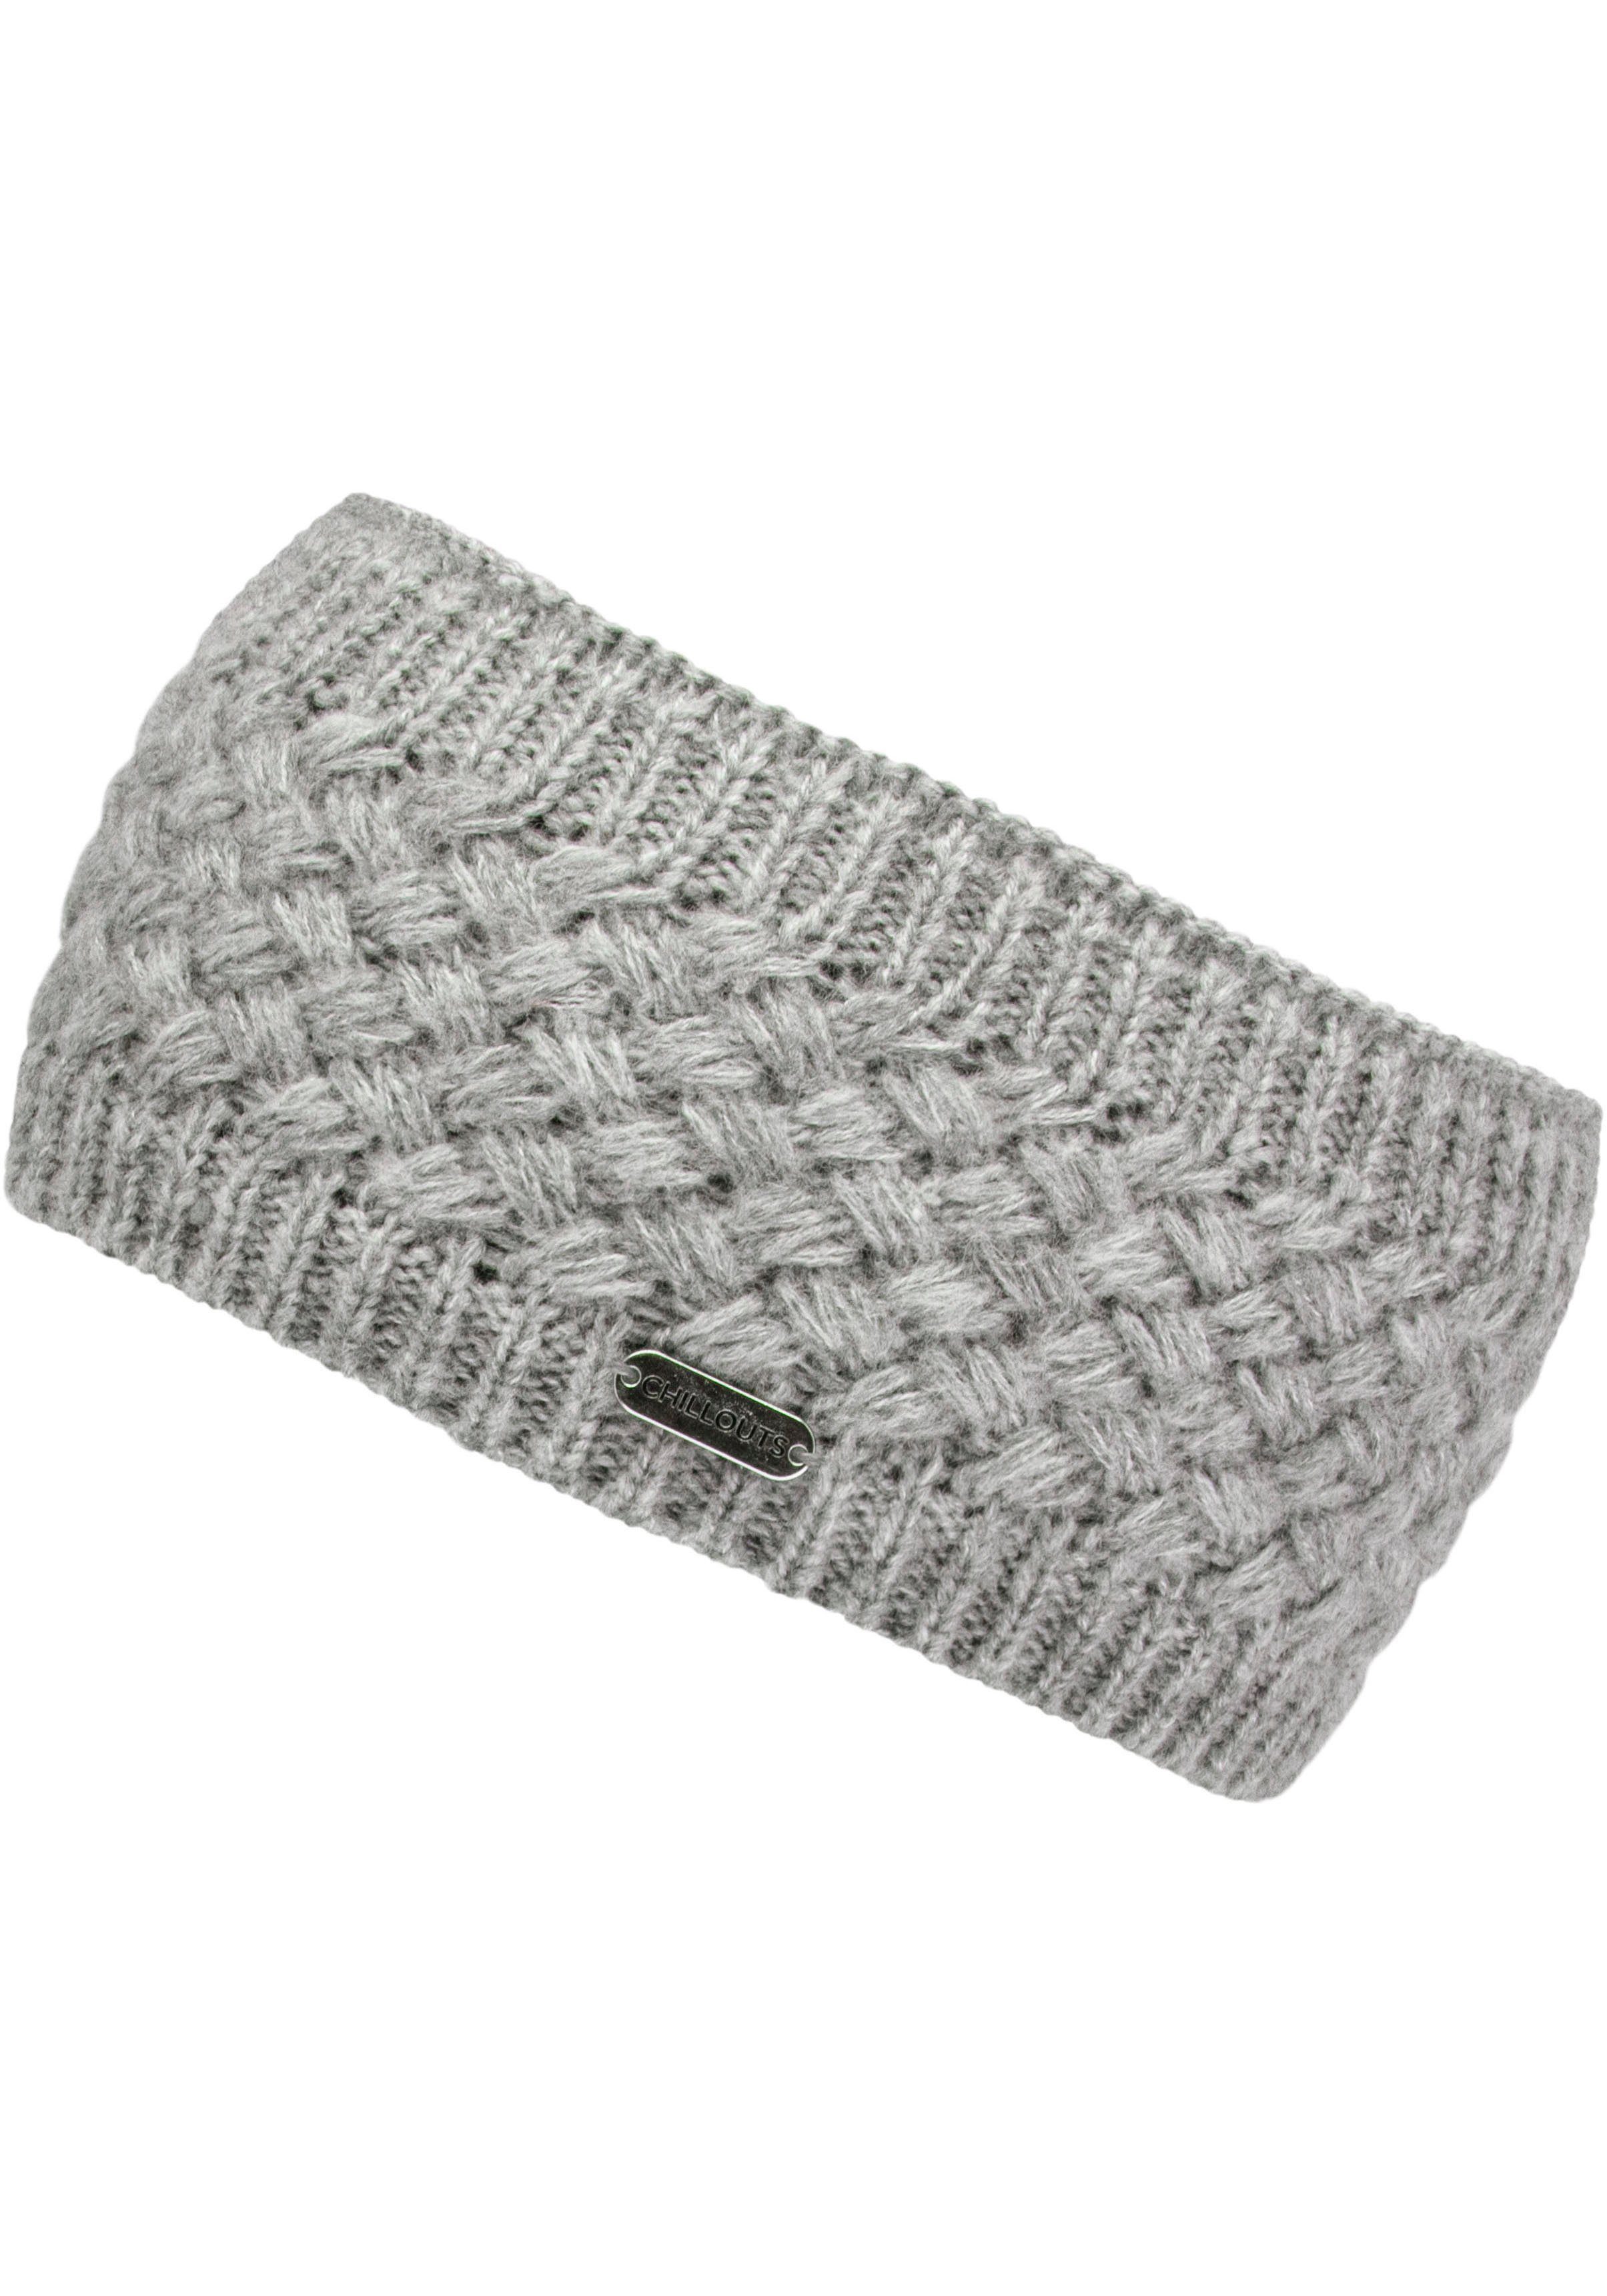 chillouts Stirnband Felicitas Headband Metall-Label grey